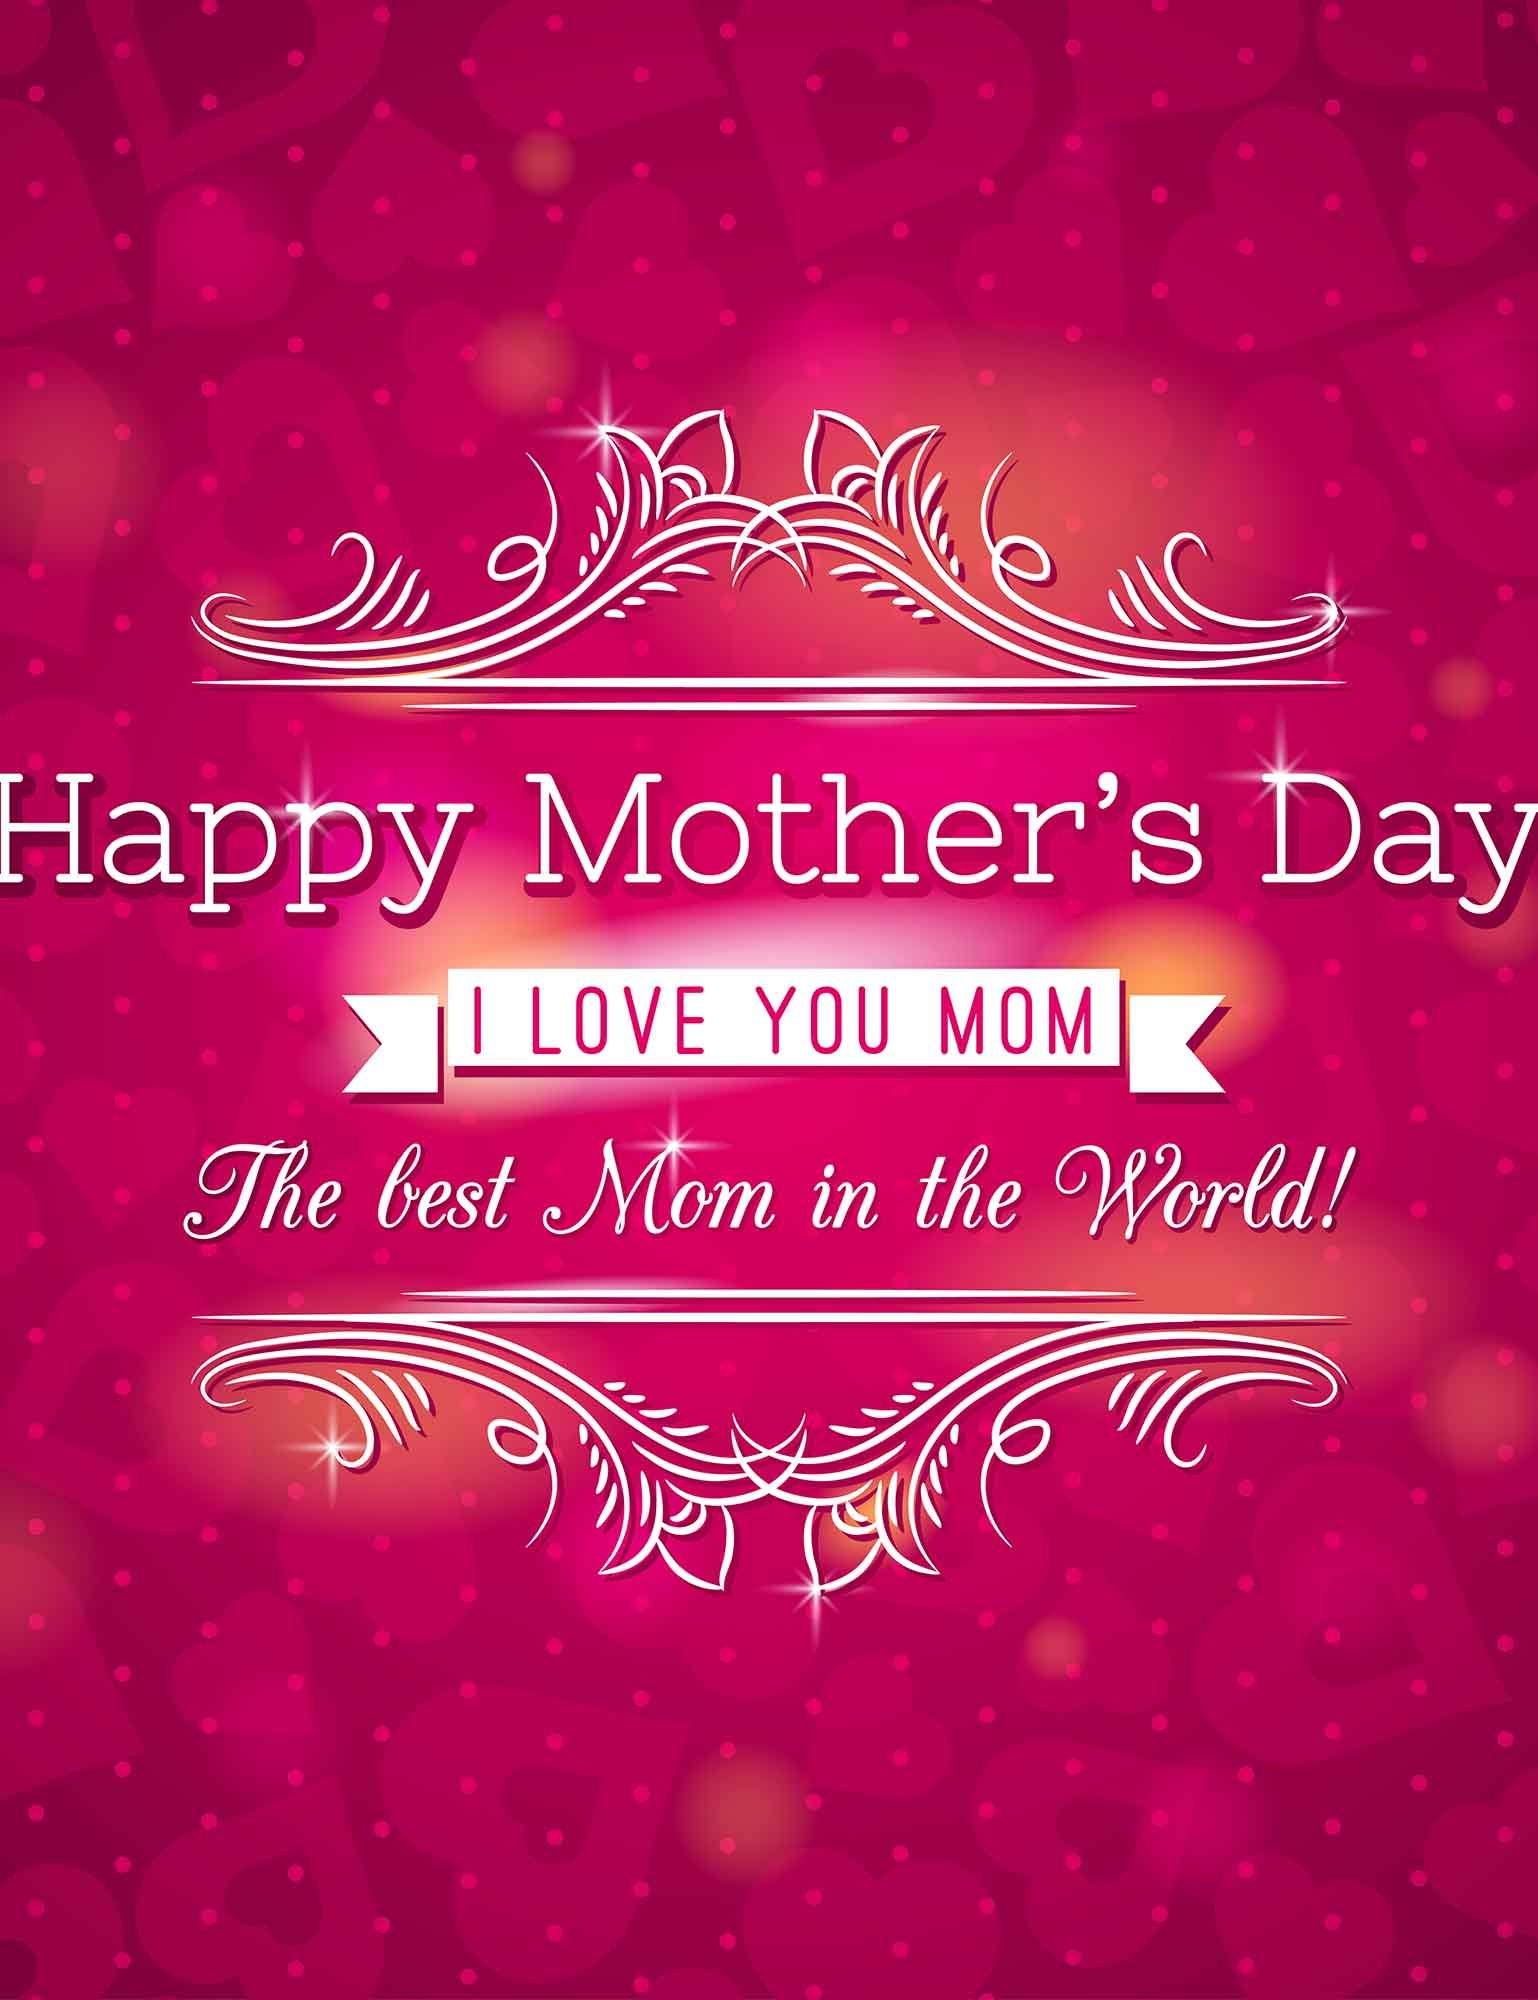 Happy Mother Day Printed On Red Hearts Background Photography Shopbackdrop